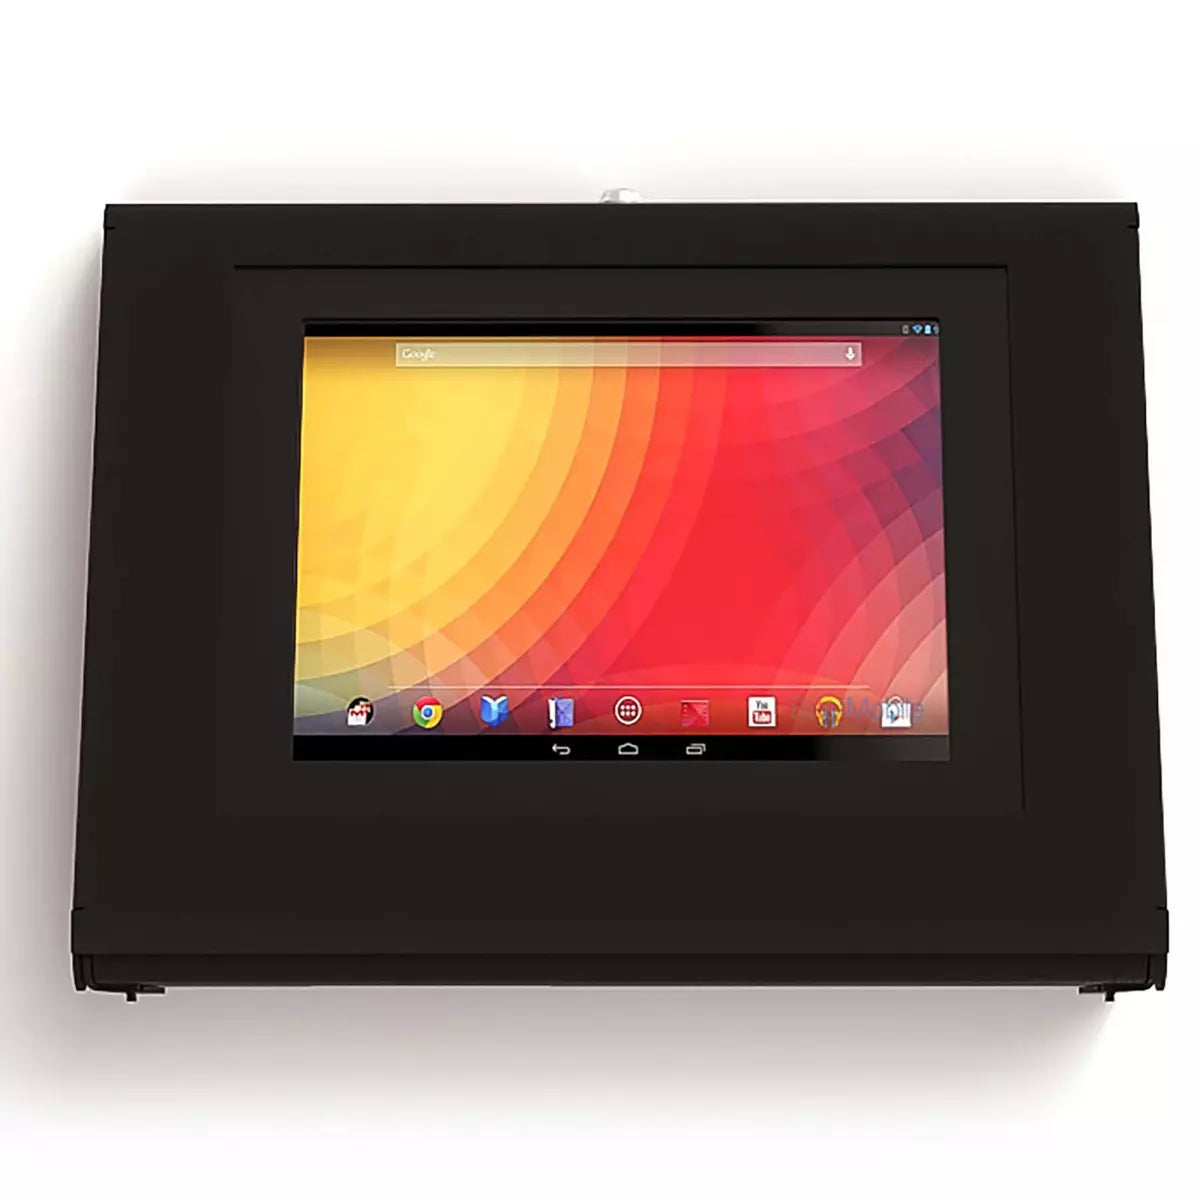 Black Keyo surface and wall mounted tablet enclosure with tablet screen interface.